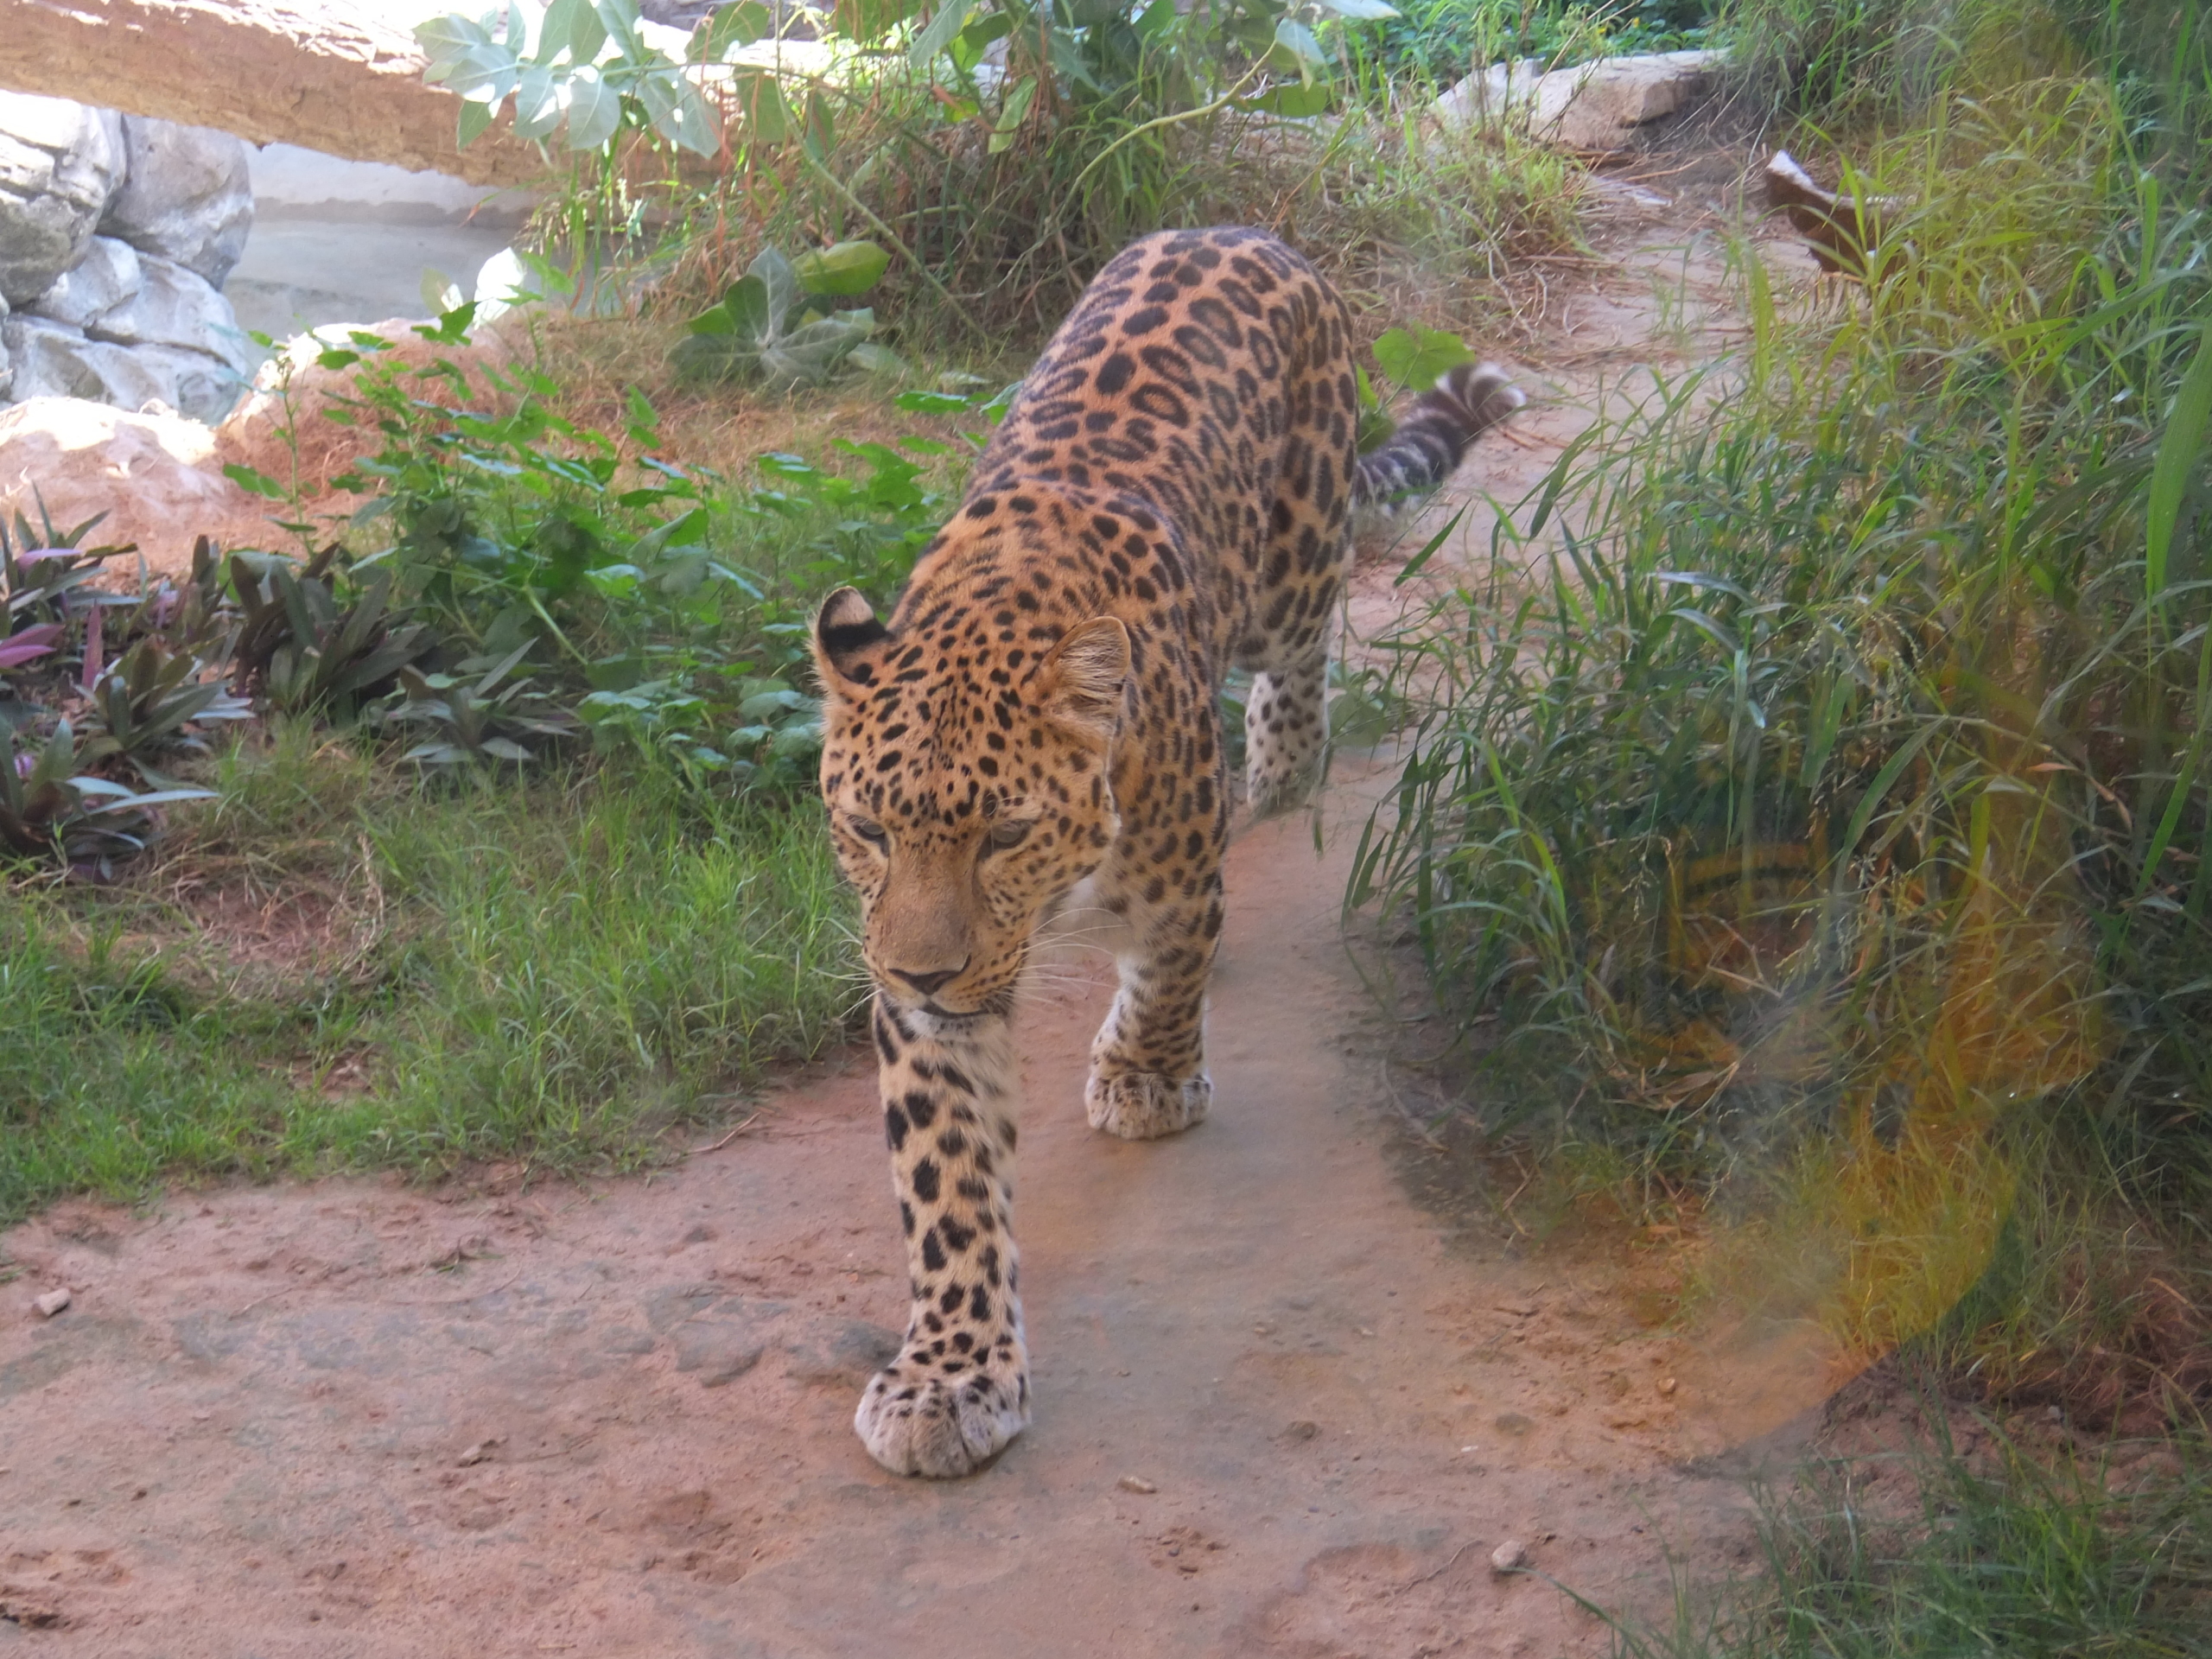 Arabian leopard found in Dhofar Governorate in Oman